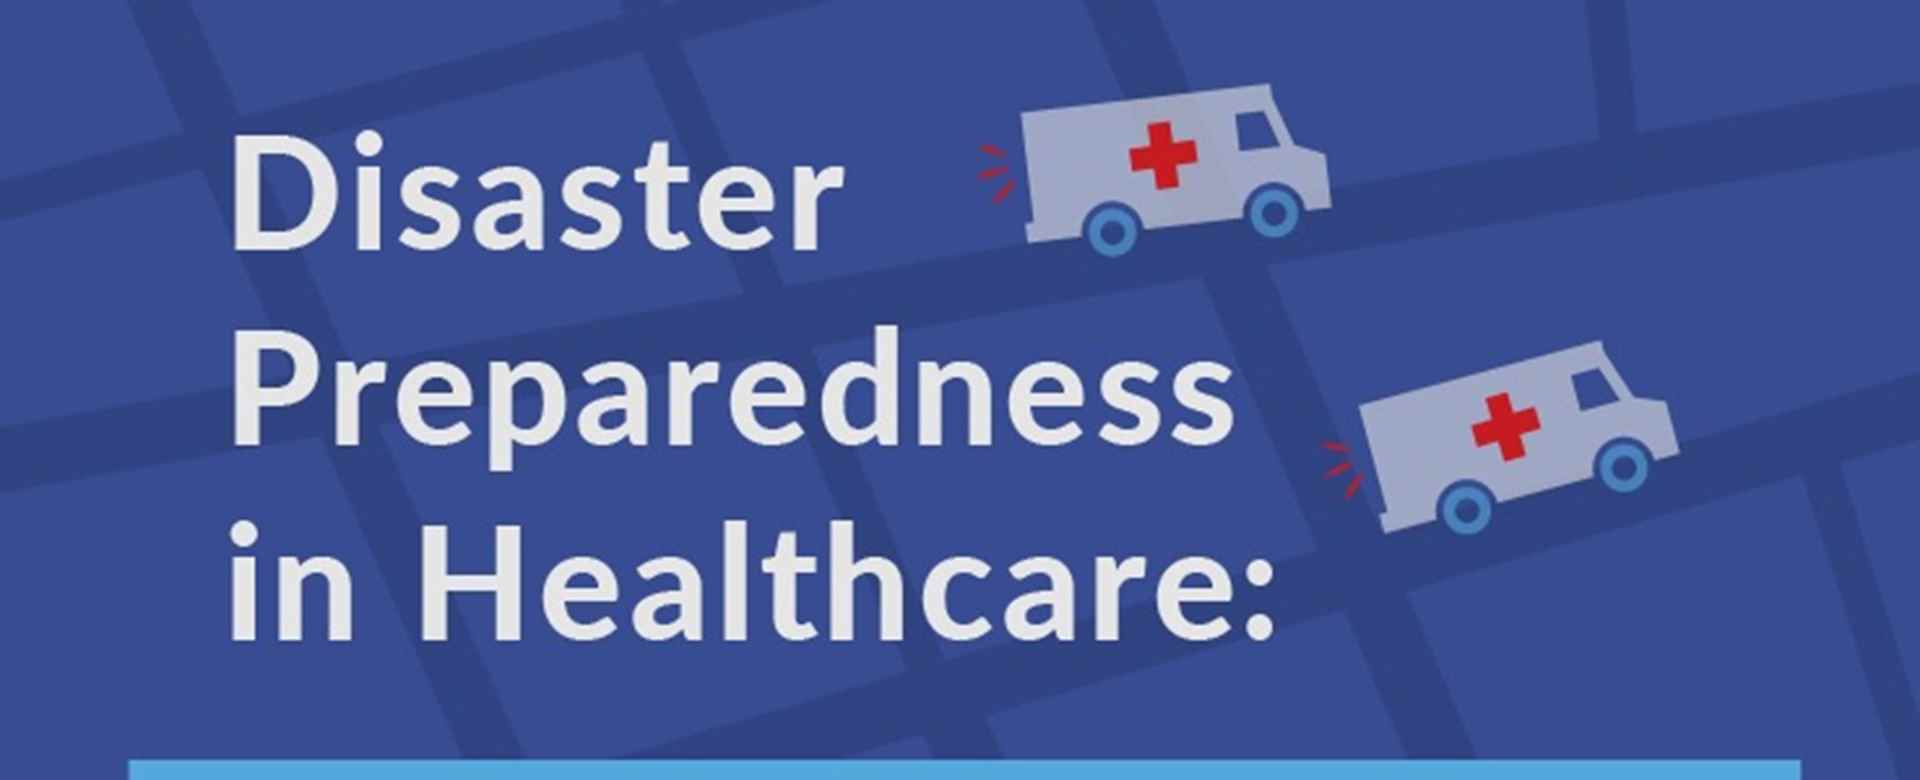 Disaster Preparedness in Healthcare: Lessons from Recent Responses [Infographic]